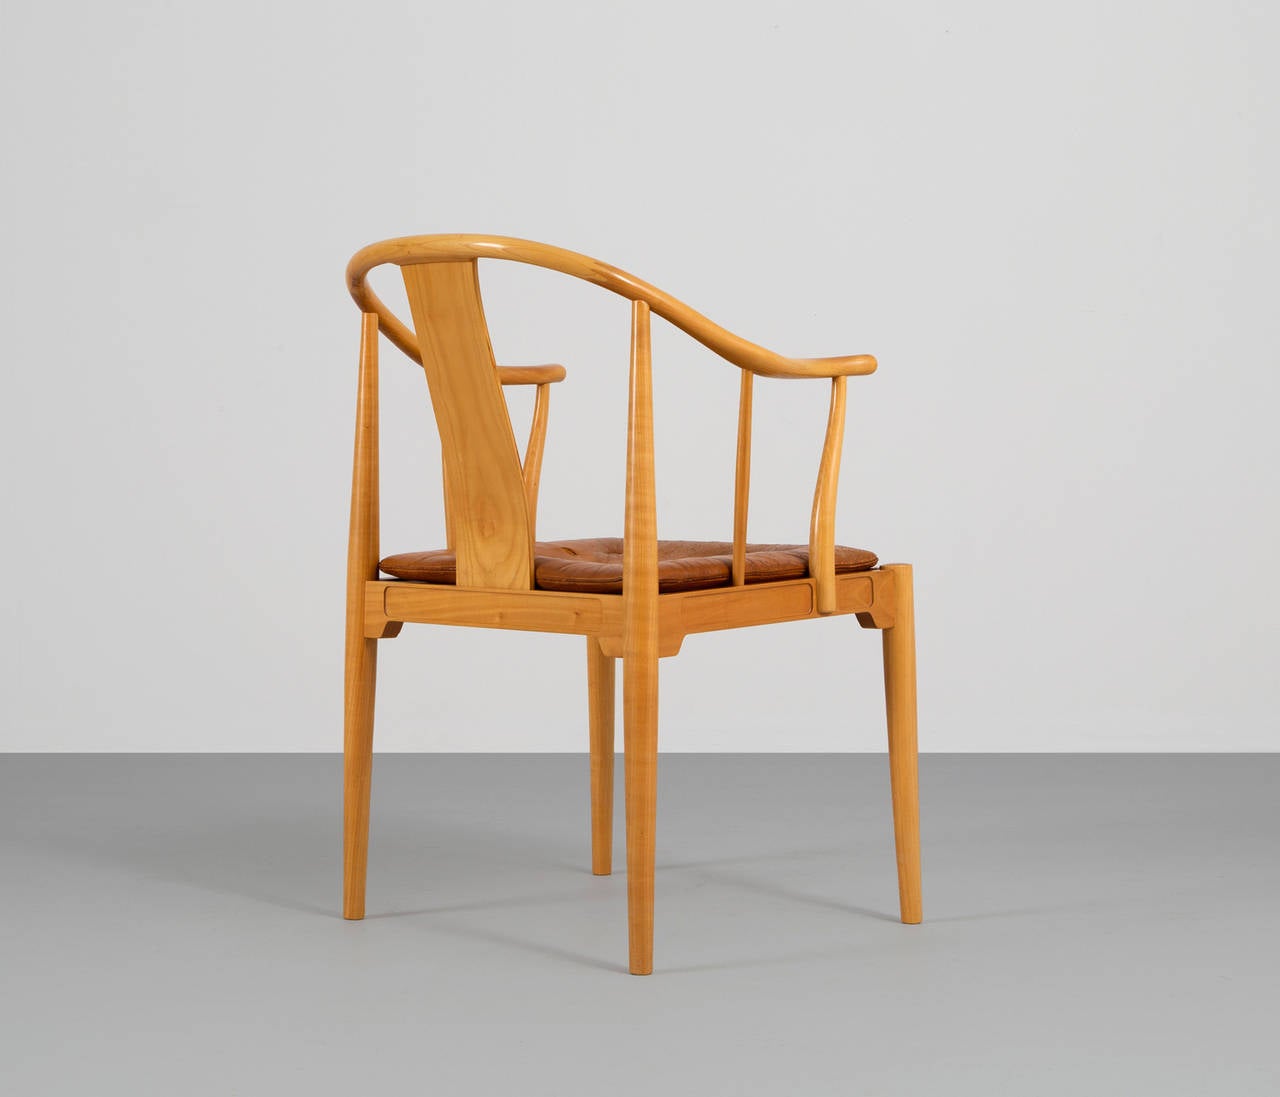 Woodwork Early China chair by Hans Wegner for Fritz Hansen